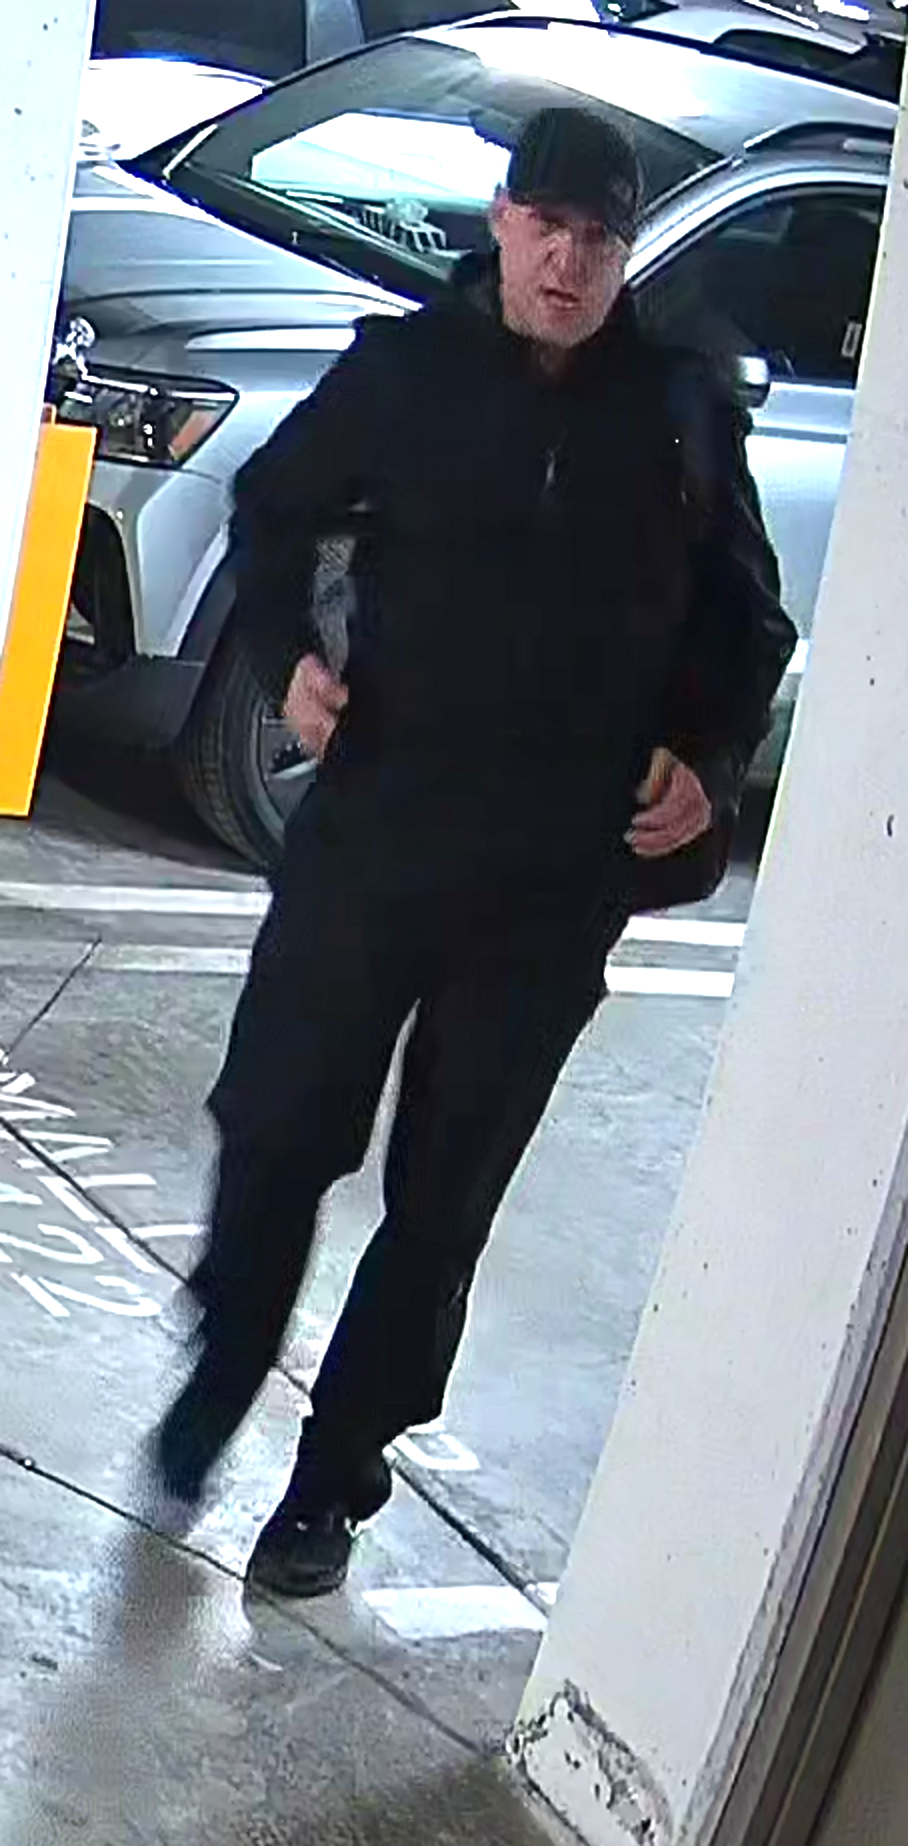 Can you help us to identify this person?